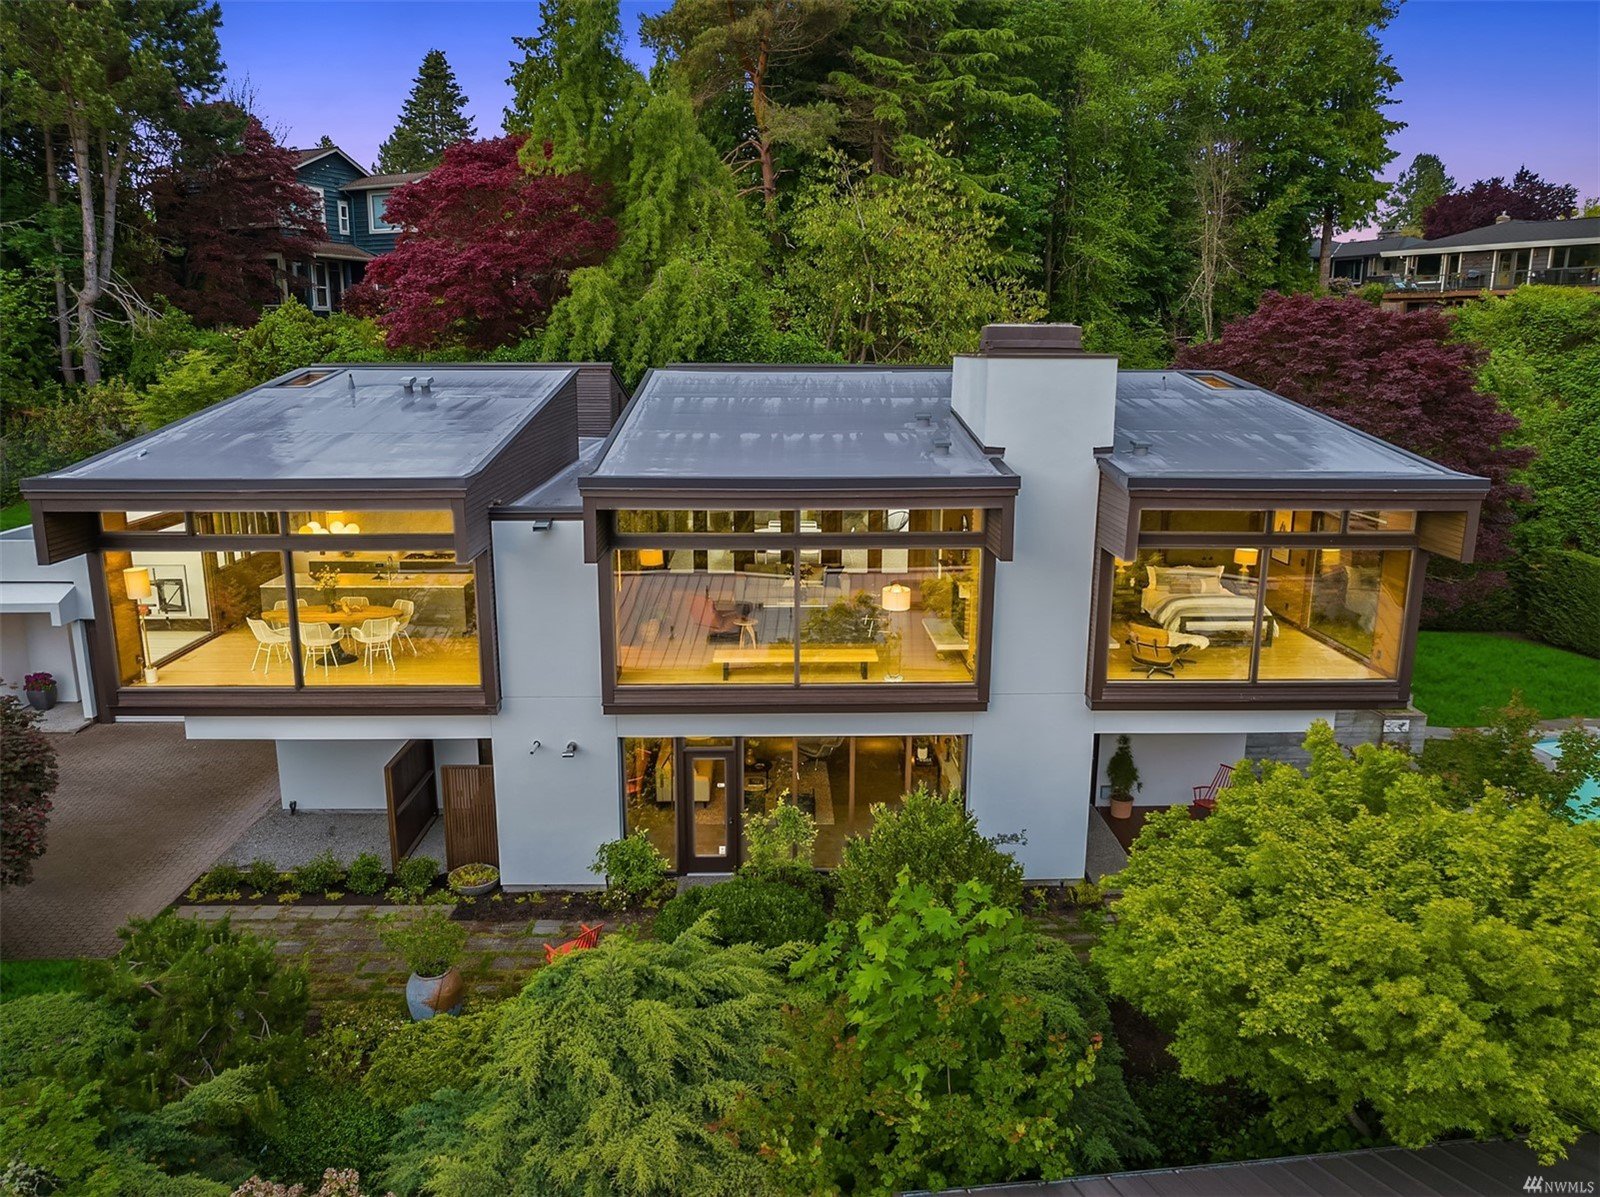 4343 W McLaren St, Seattle | Sold for $3,920,000 | Buyer Represented